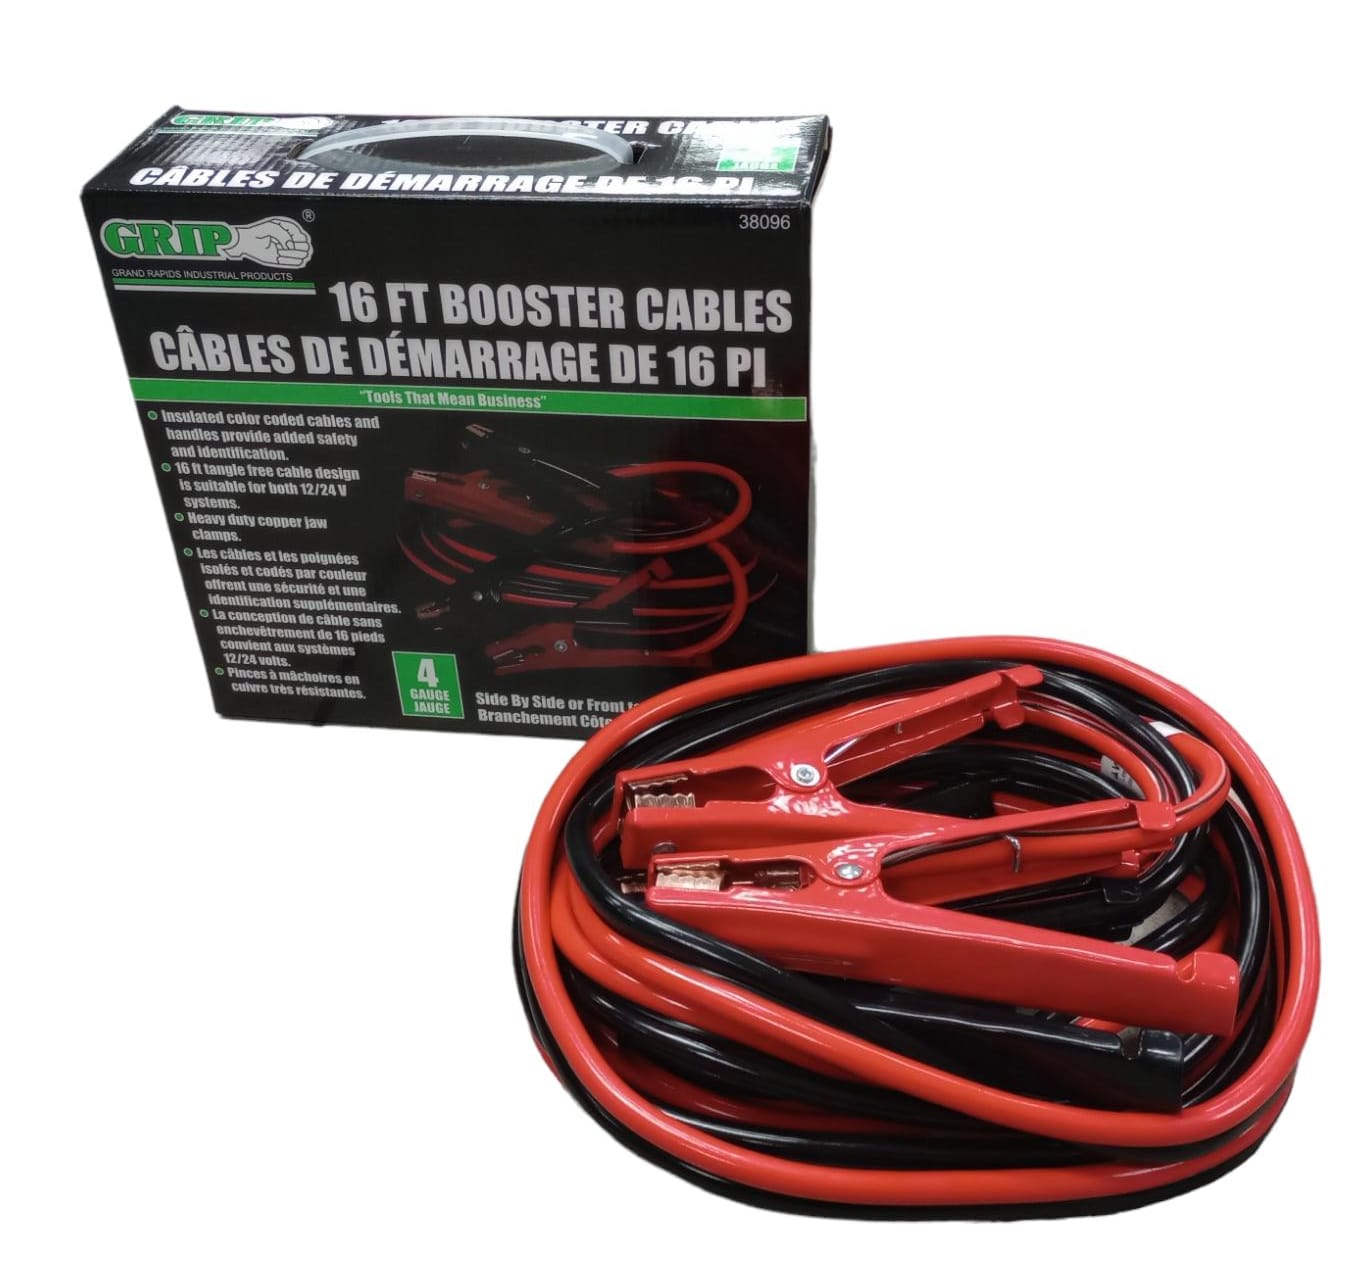 16 FT 4 GAUGE BOOSTER CABLES